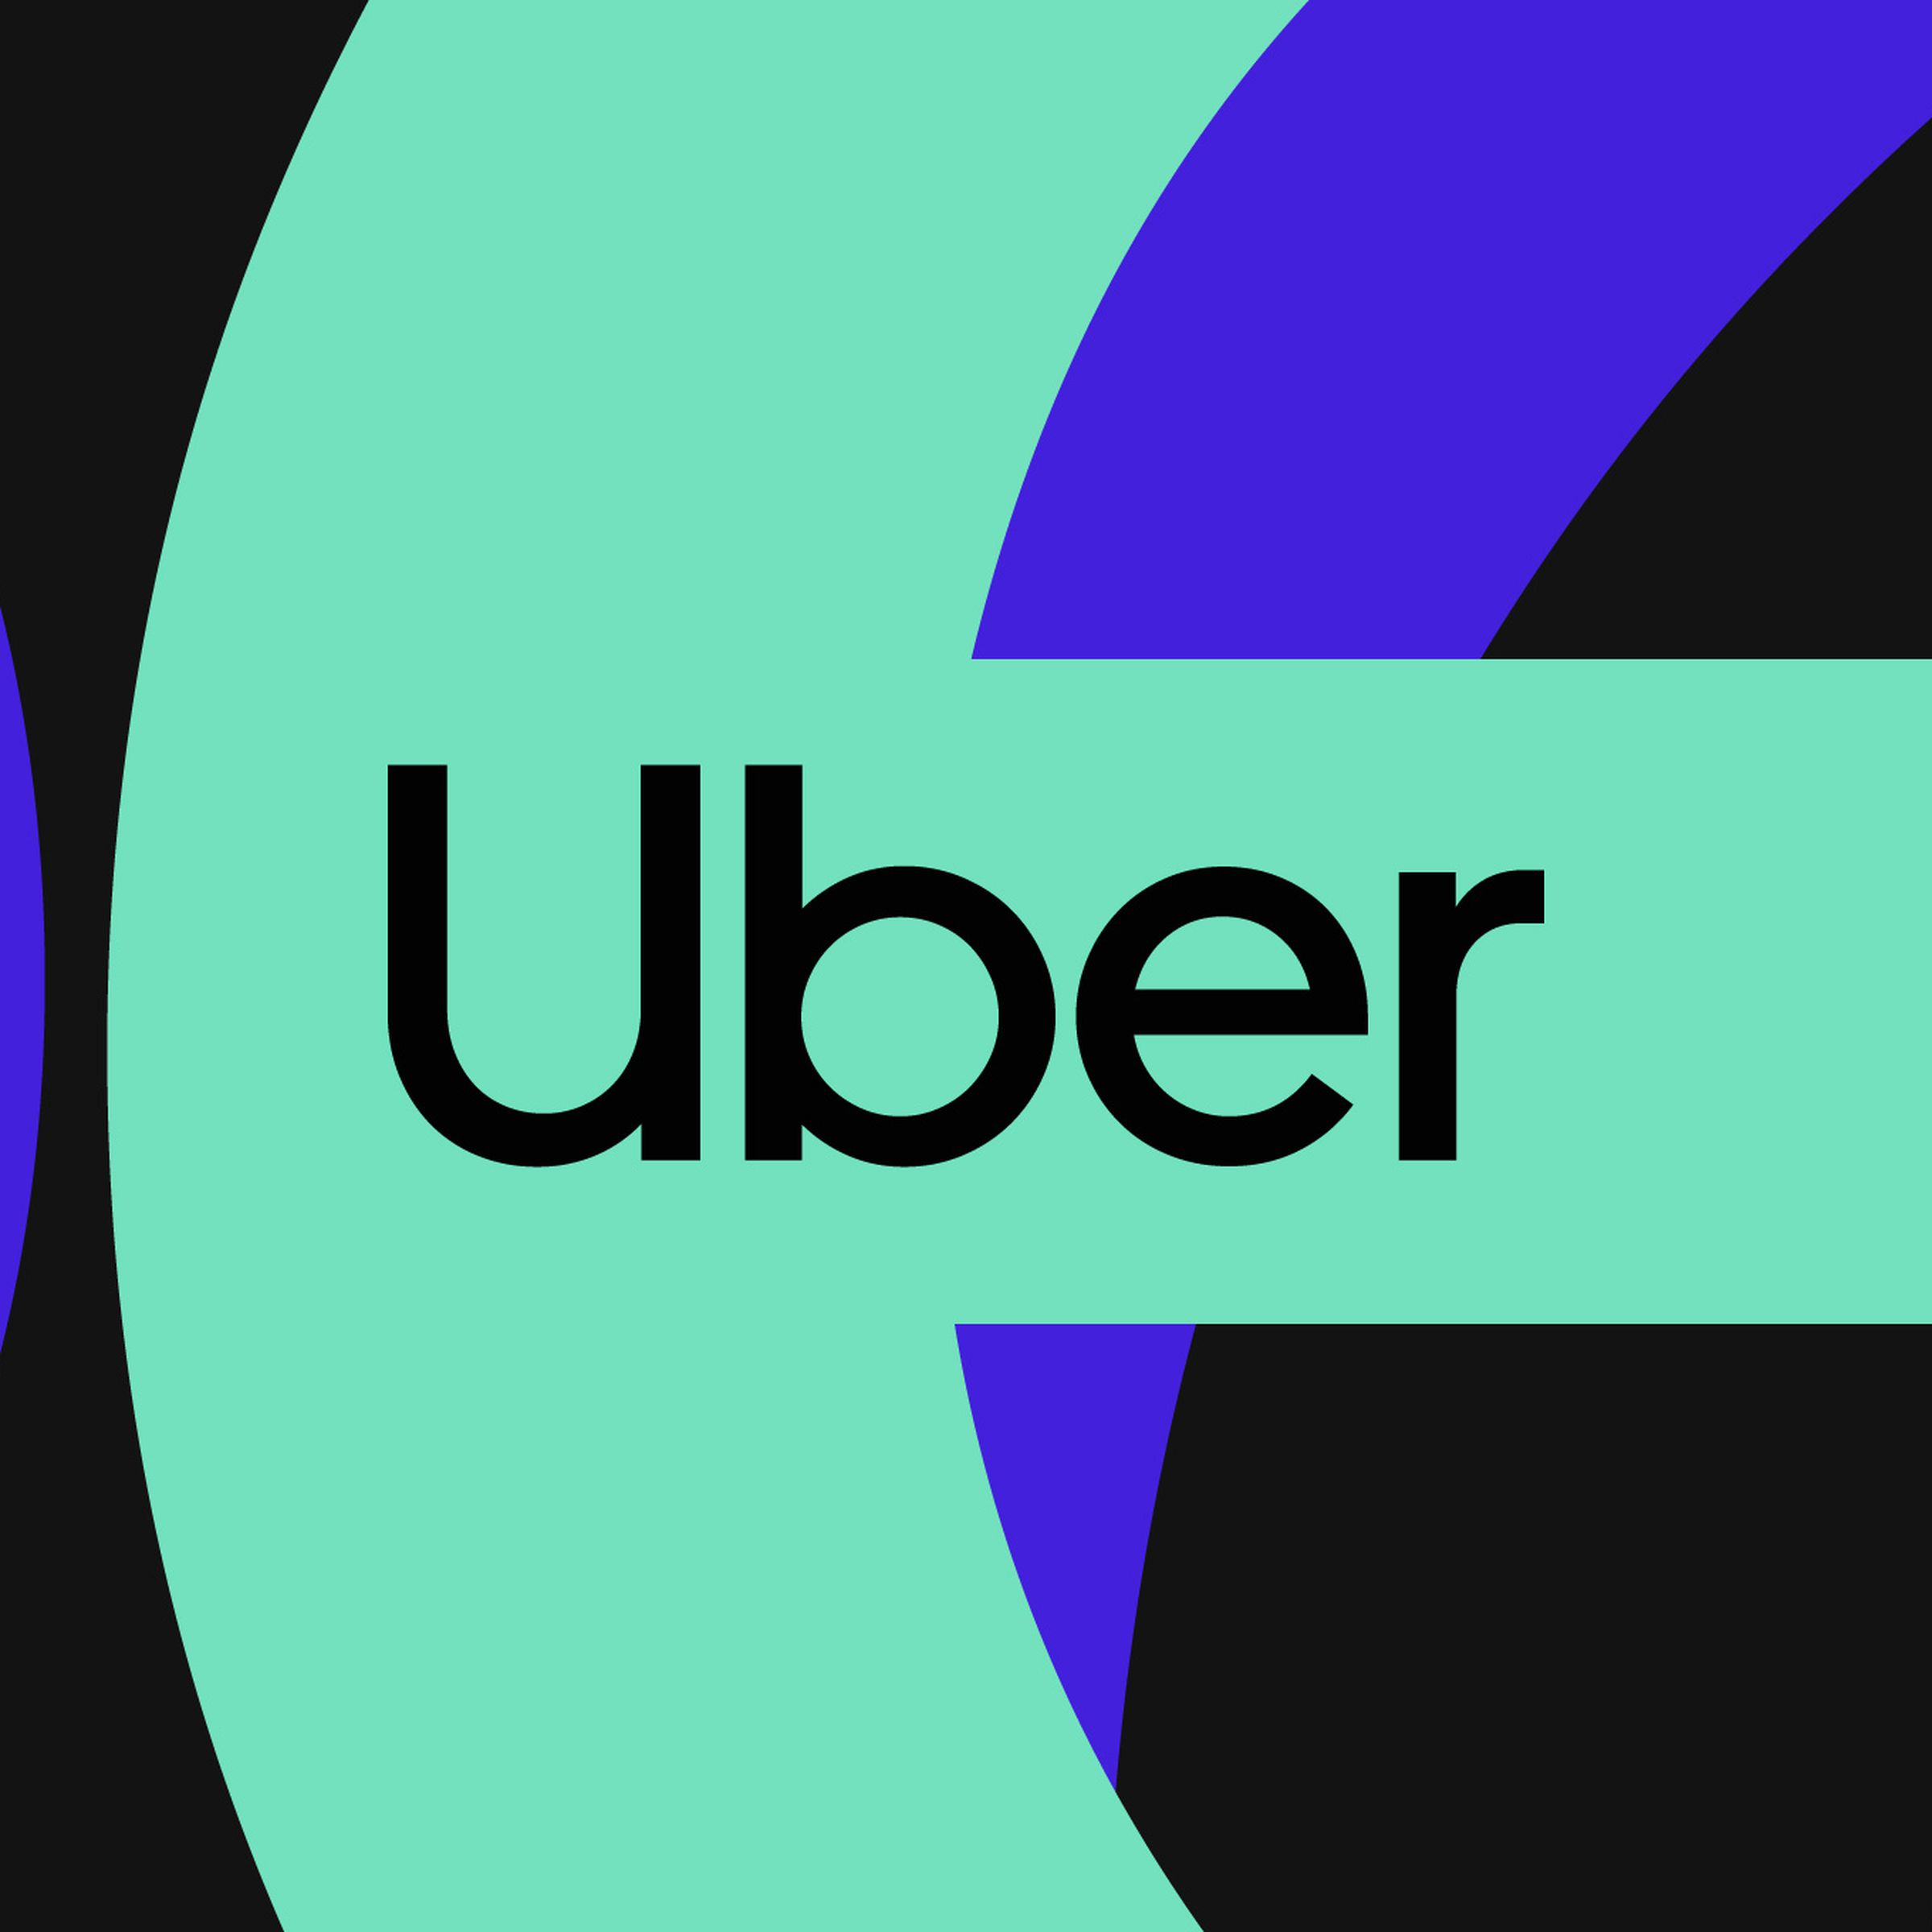 Uber company name written on a multicolored background.